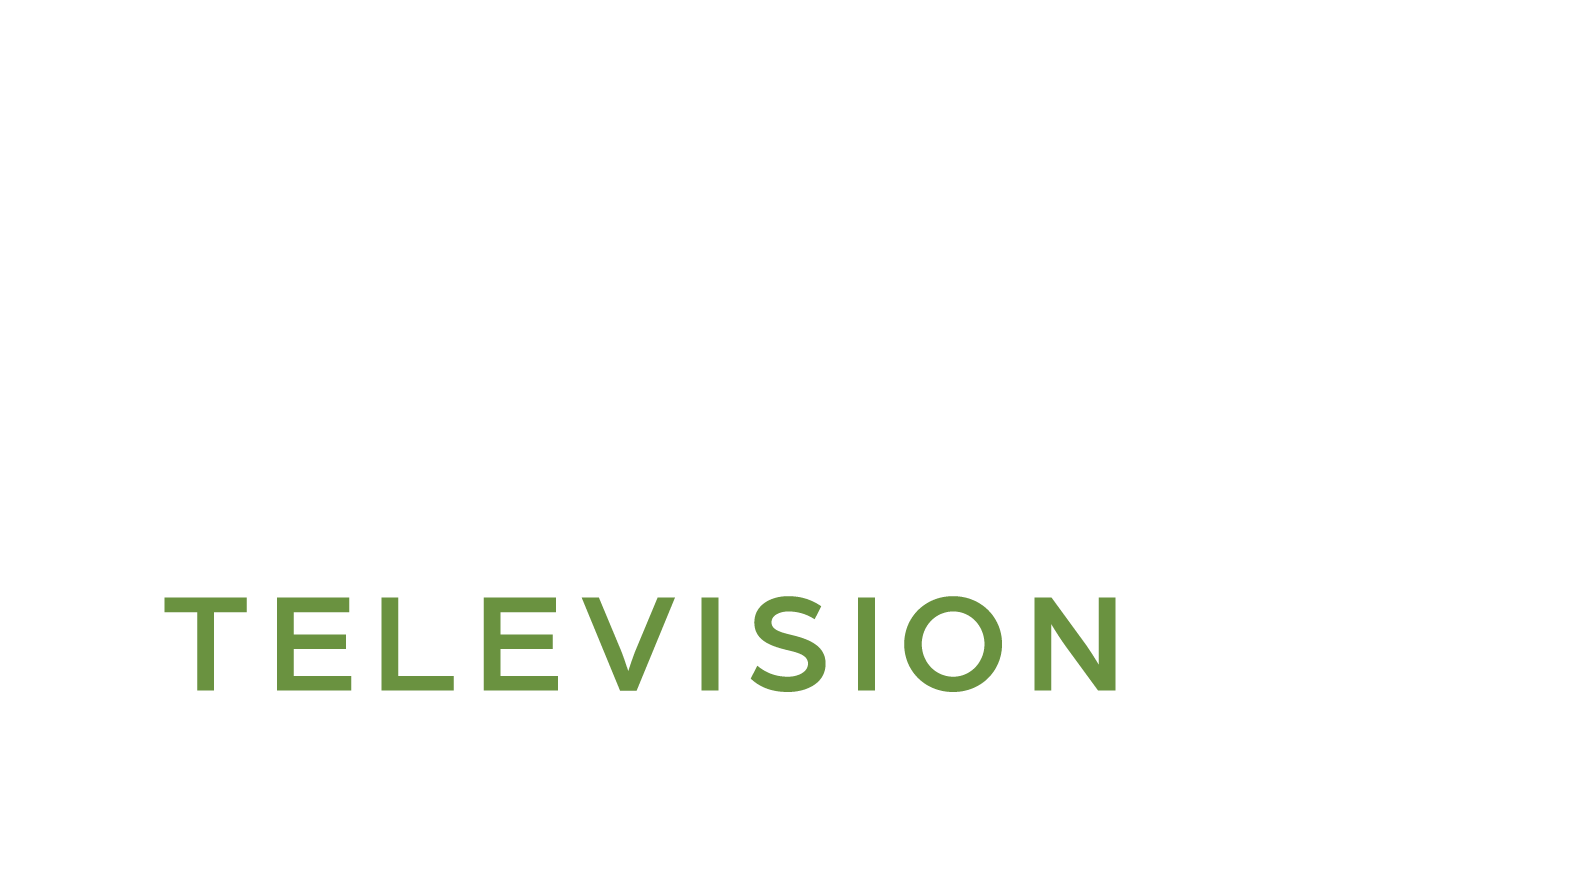 Story Television